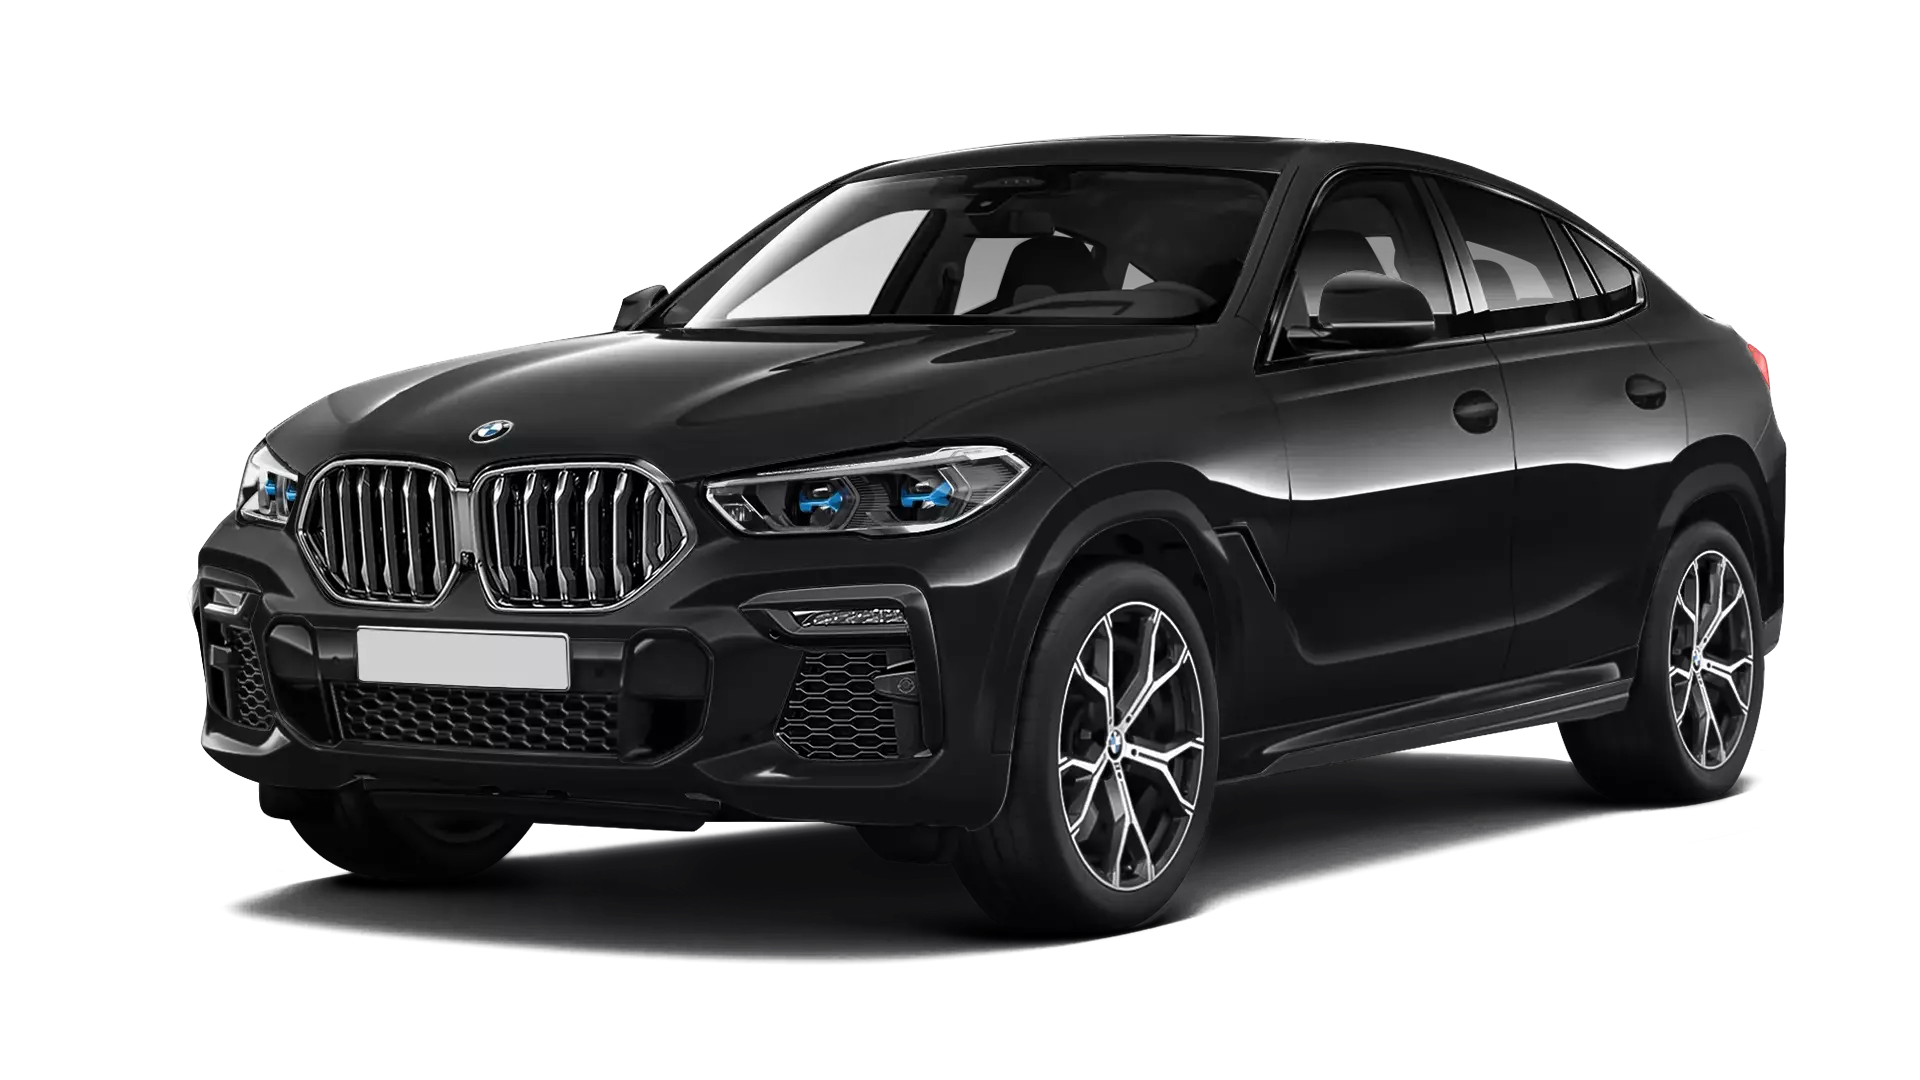 BMW X6 G06 stock front view in Black Sapphire color